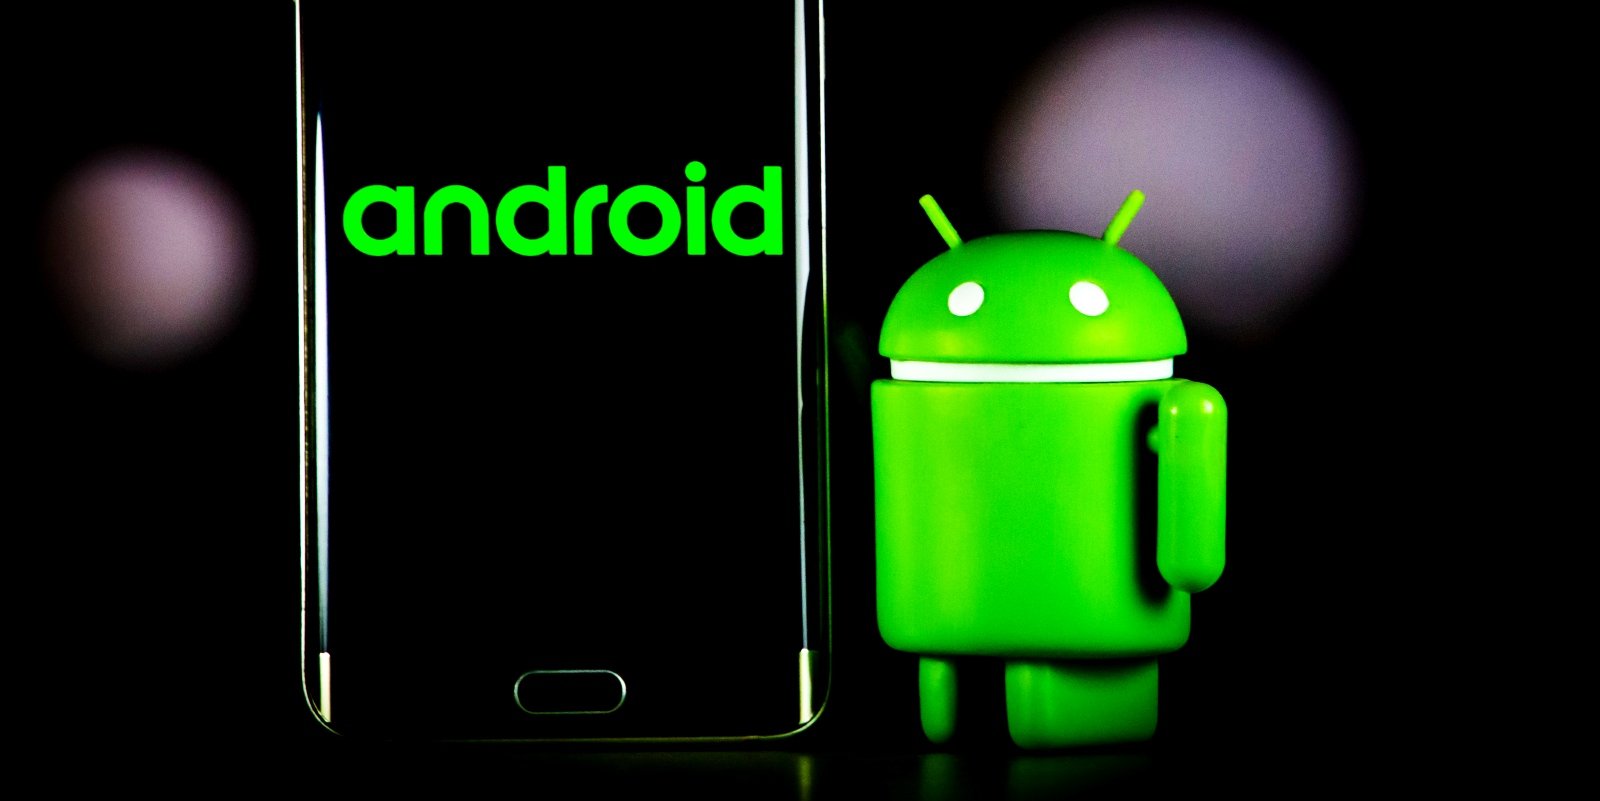 android-security-update-fixes-mali-gpu-flaw-exploited-by-spyware